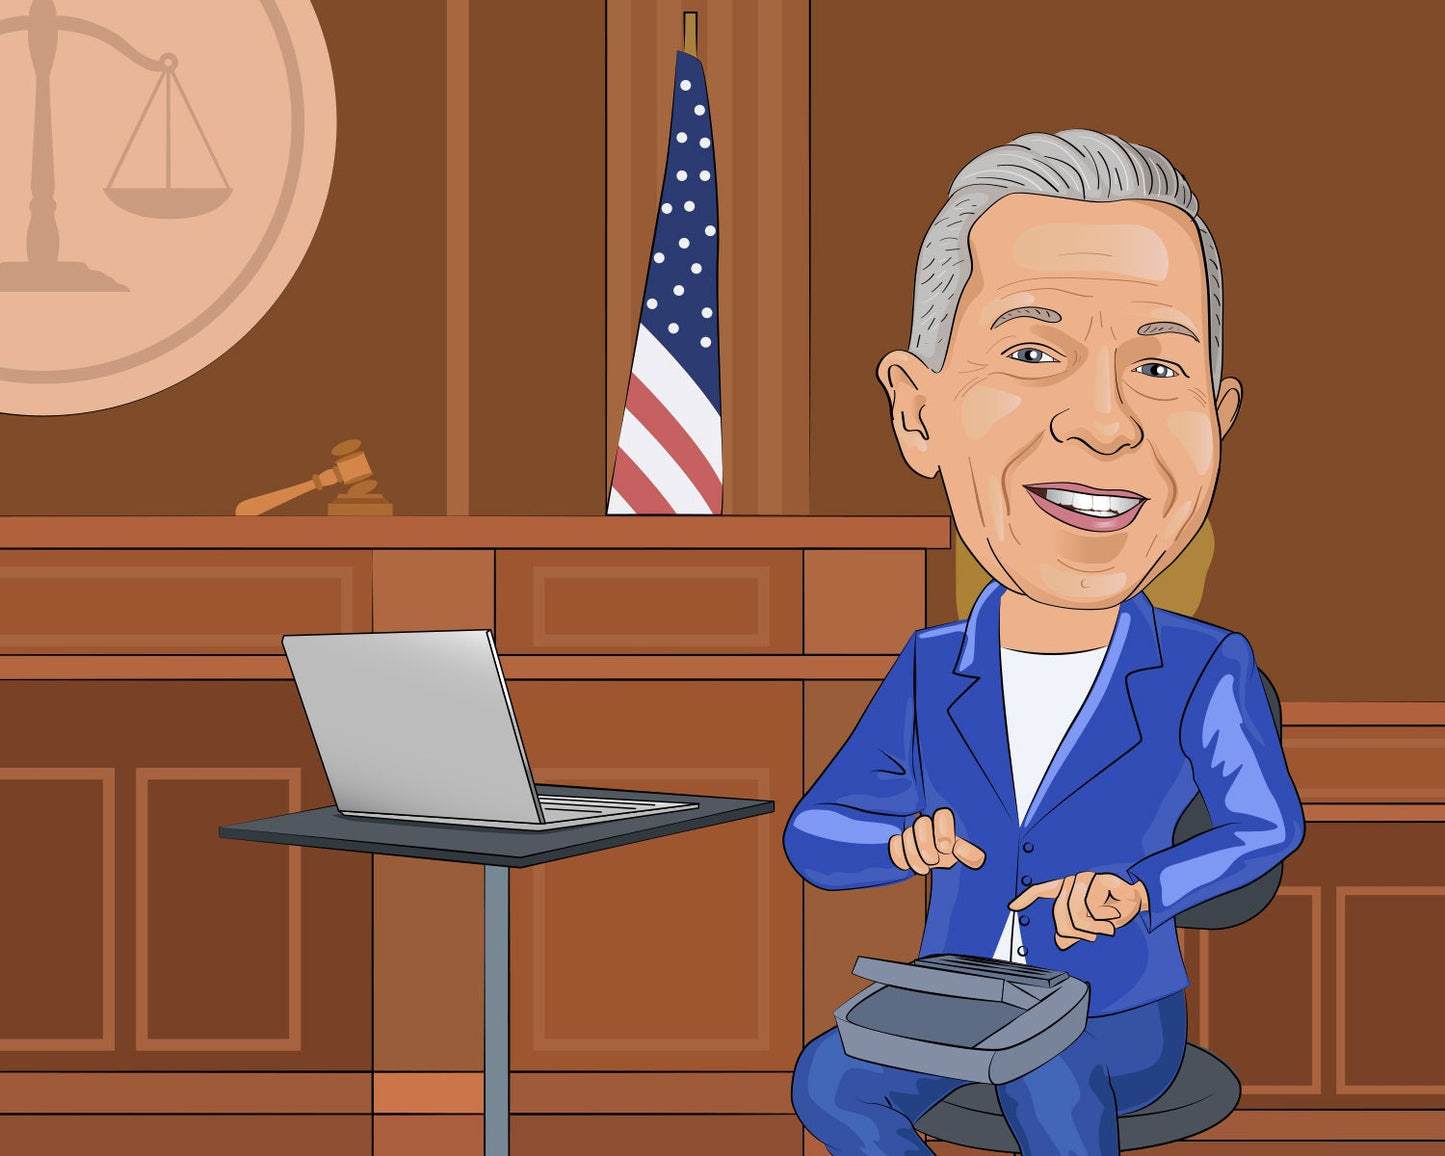 Court Reporter Gift - Custom Caricature Portrait From Your Photo